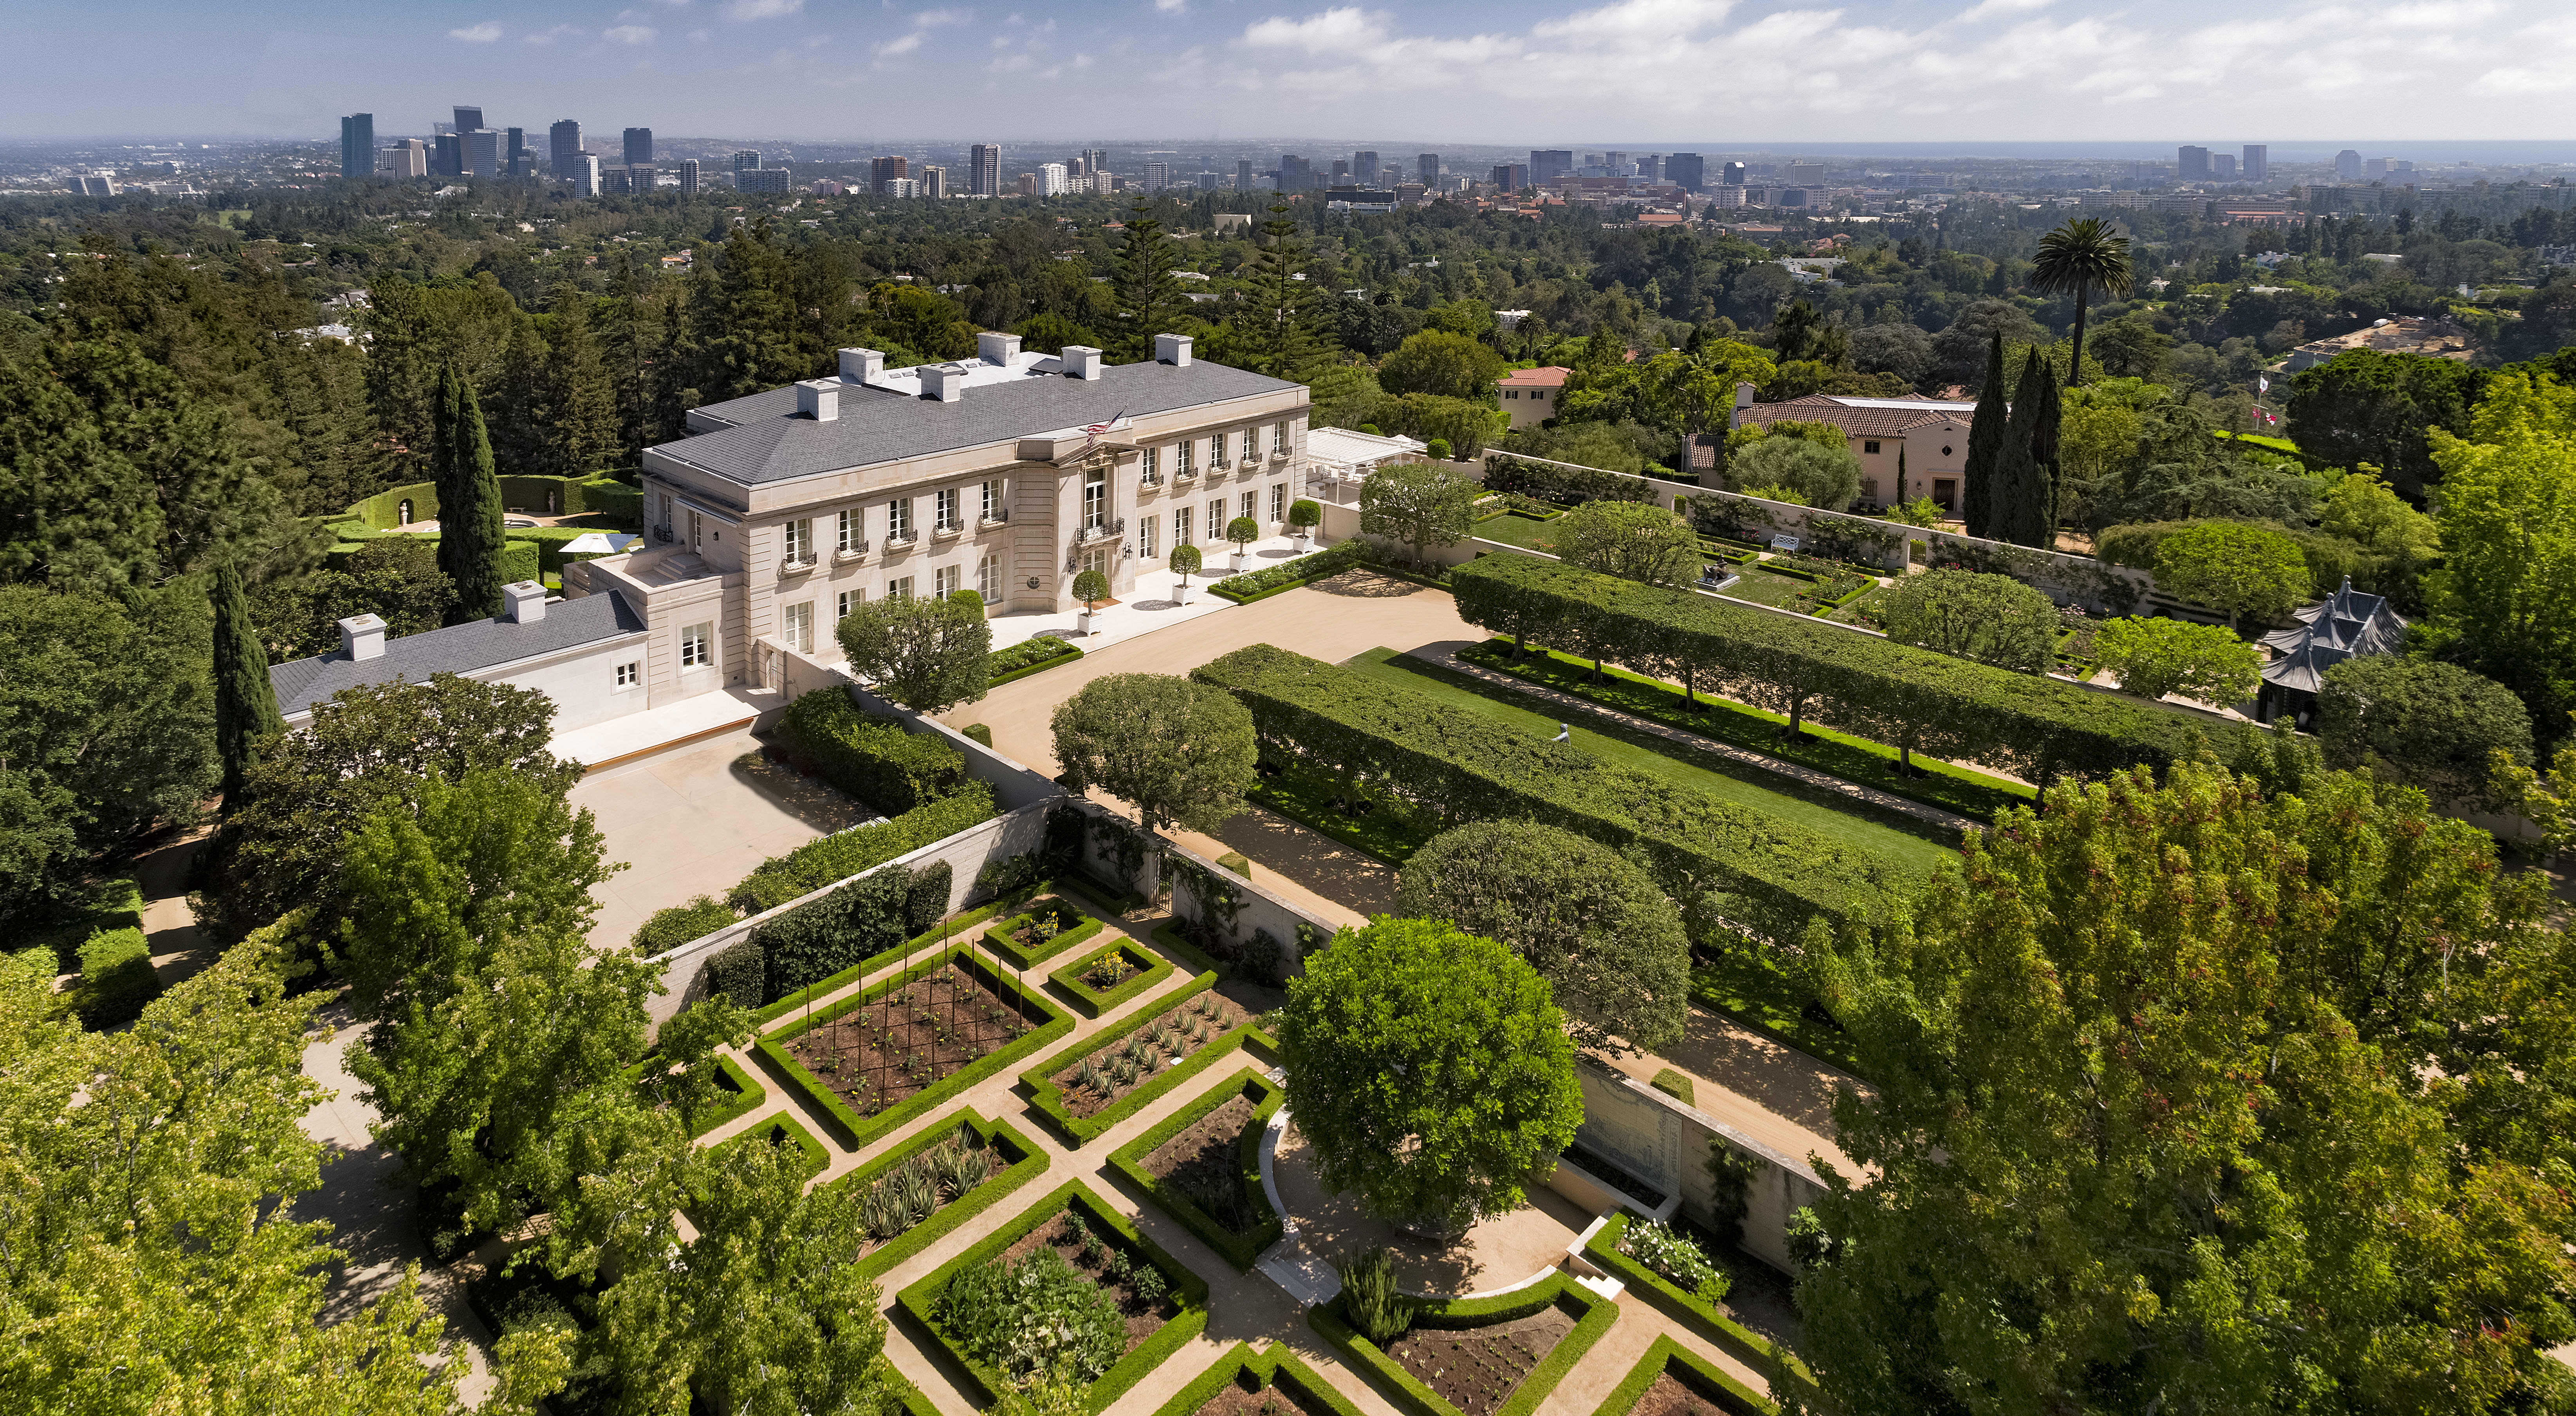 The Chartwell Estate in Los Angeles